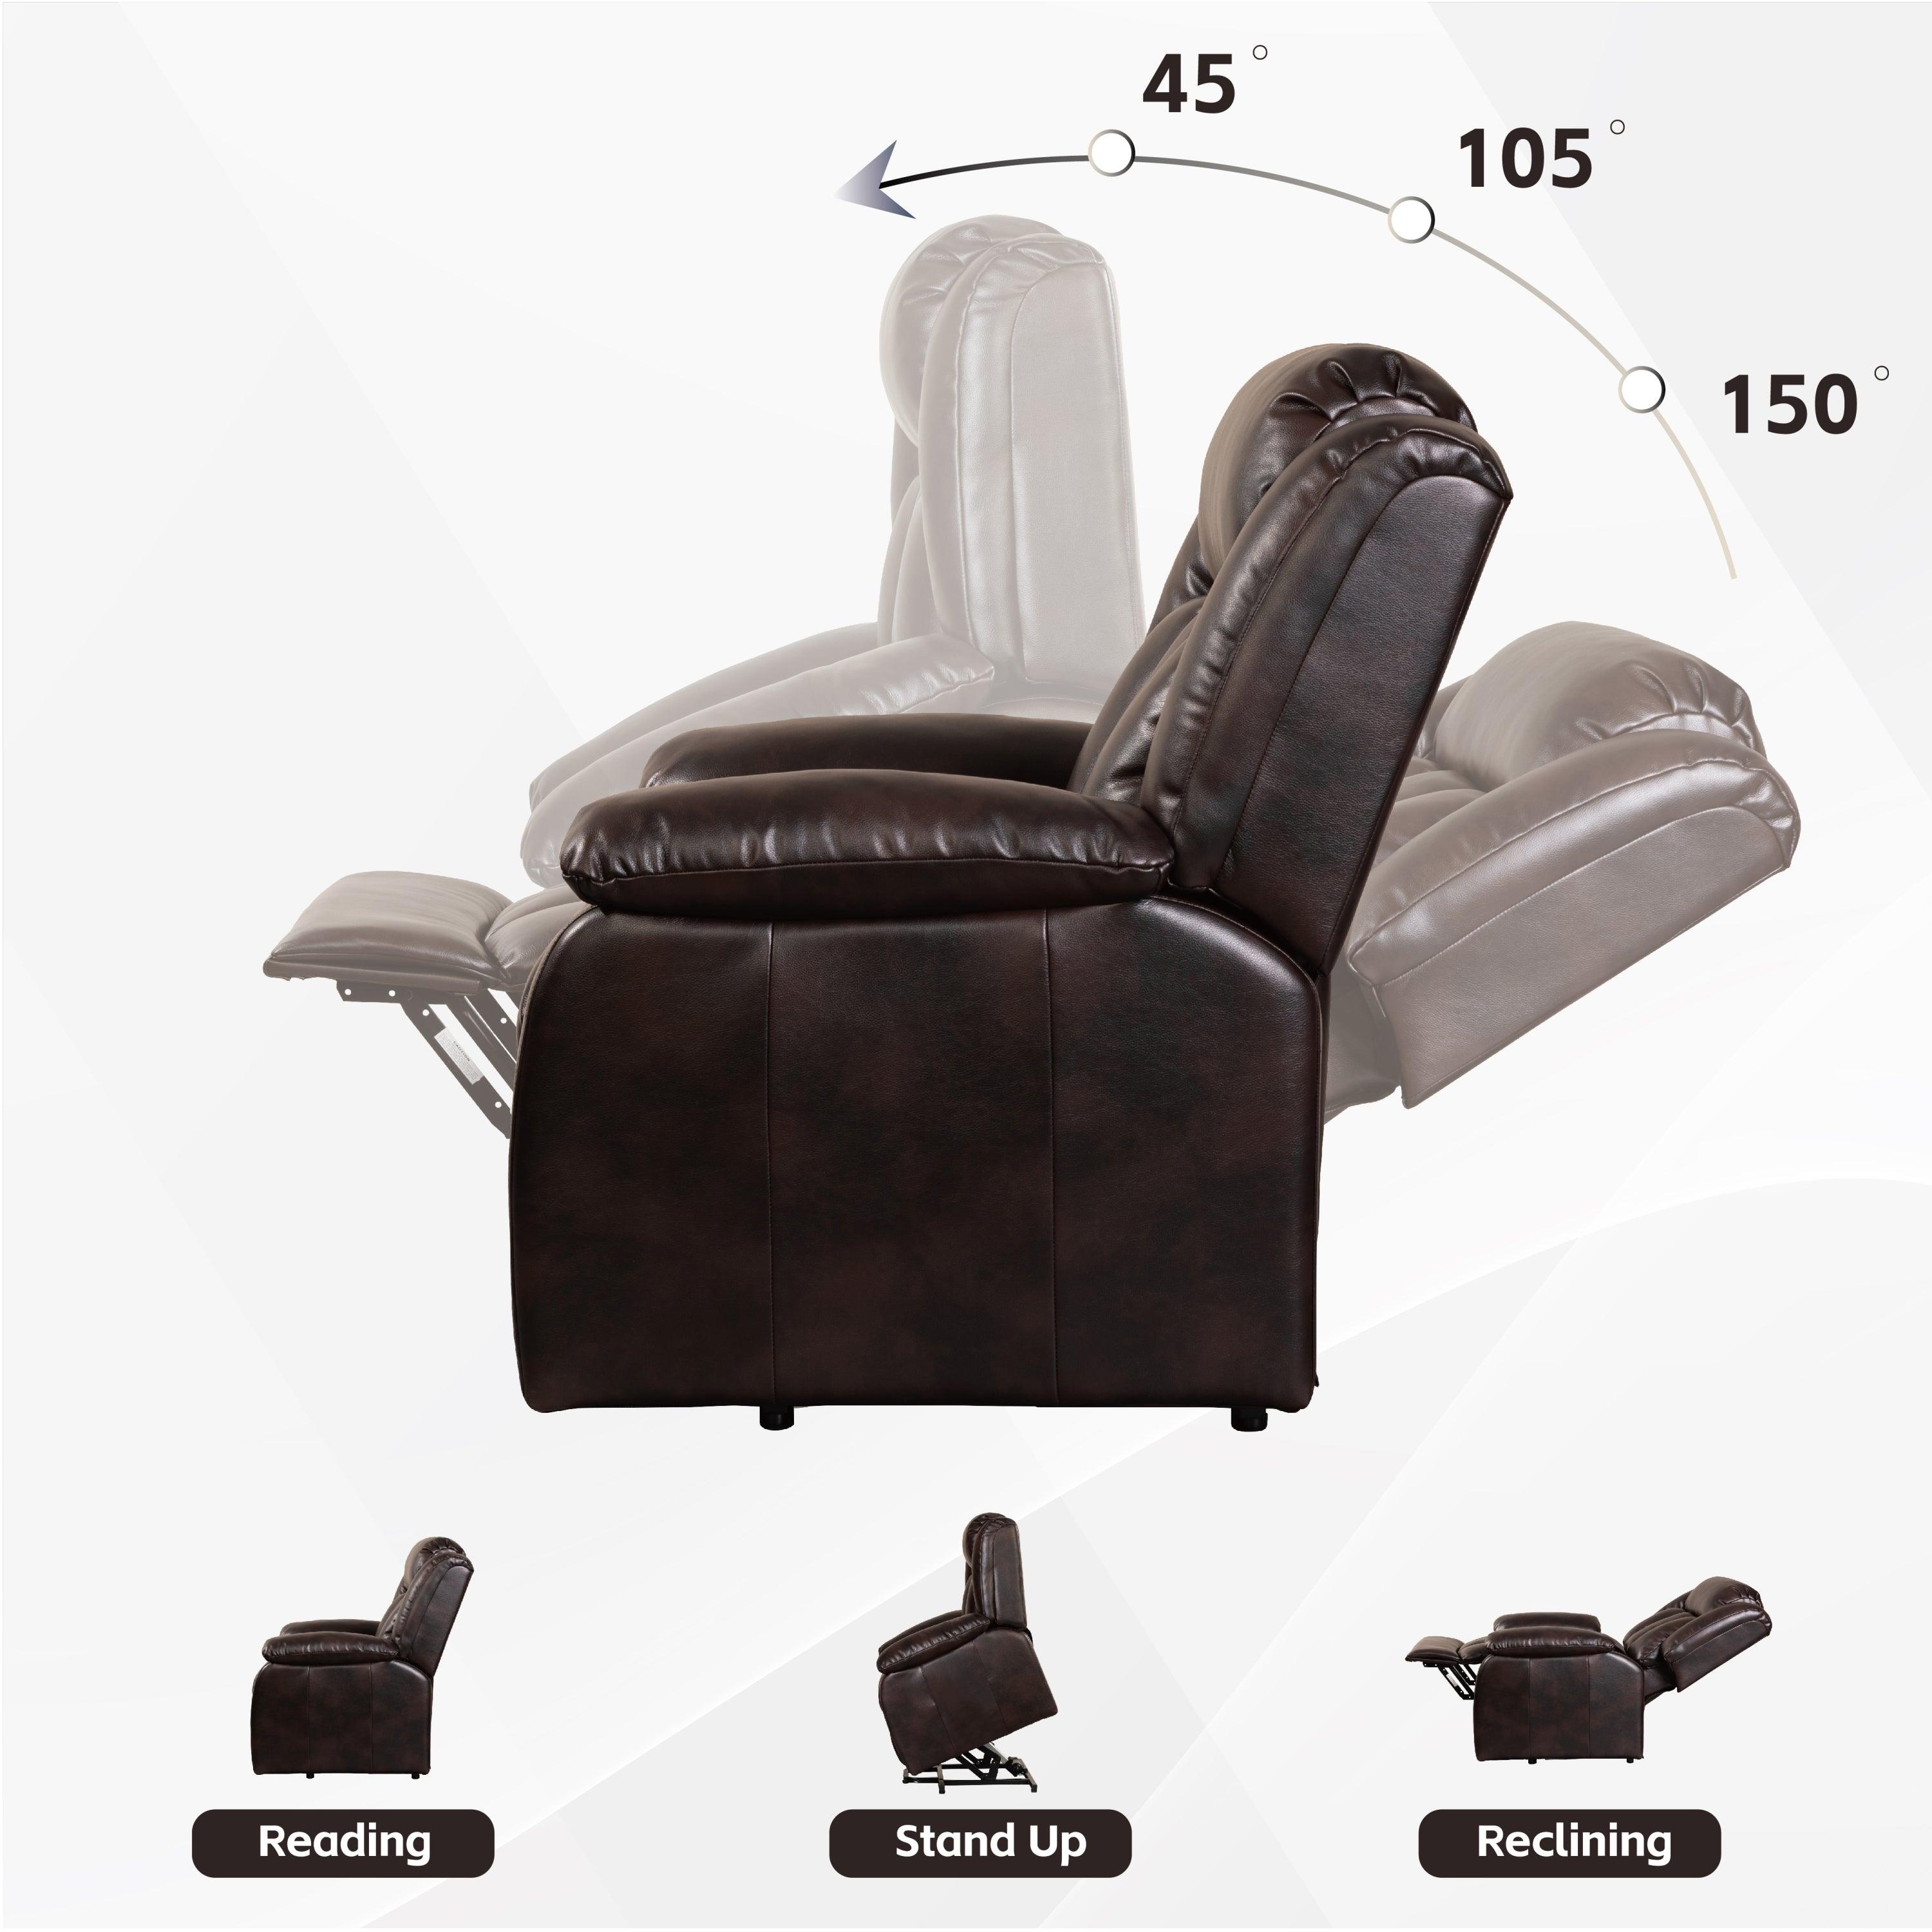 Red brown lift chair recliner with massage and heat, chair angles